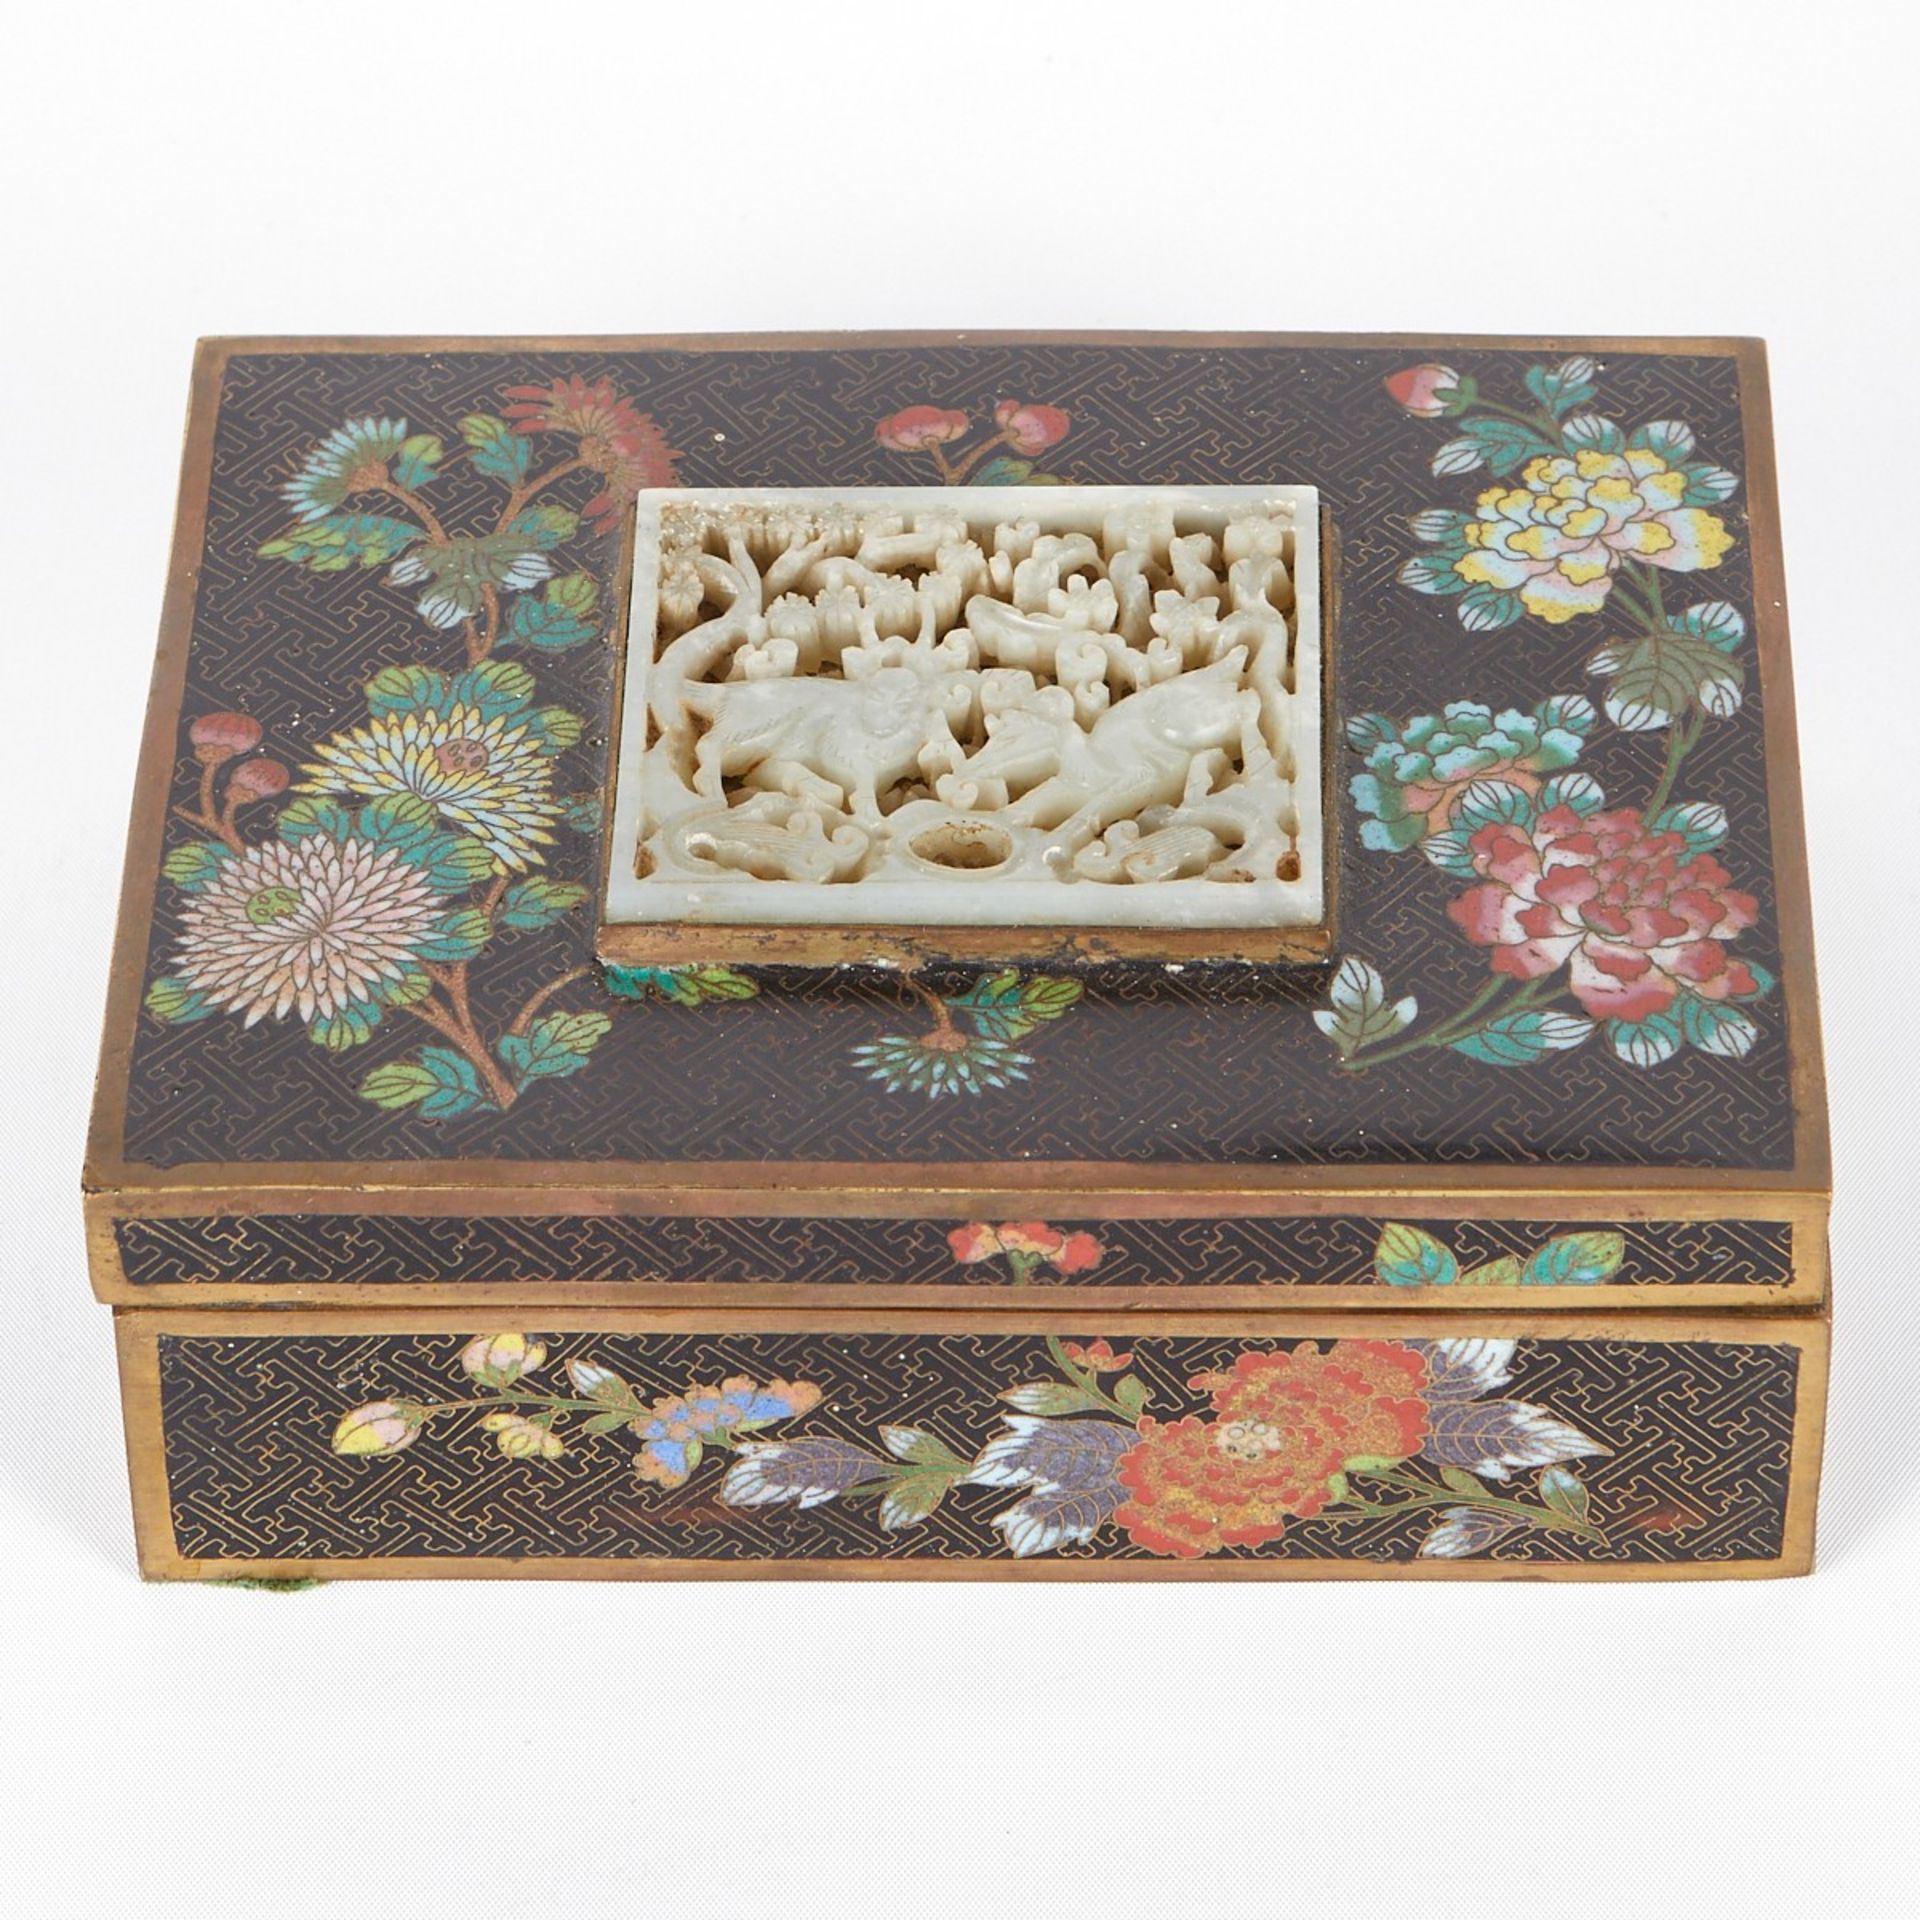 Grp: 3 Chinese Cloisonne Pieces Box & Figures - Image 5 of 12